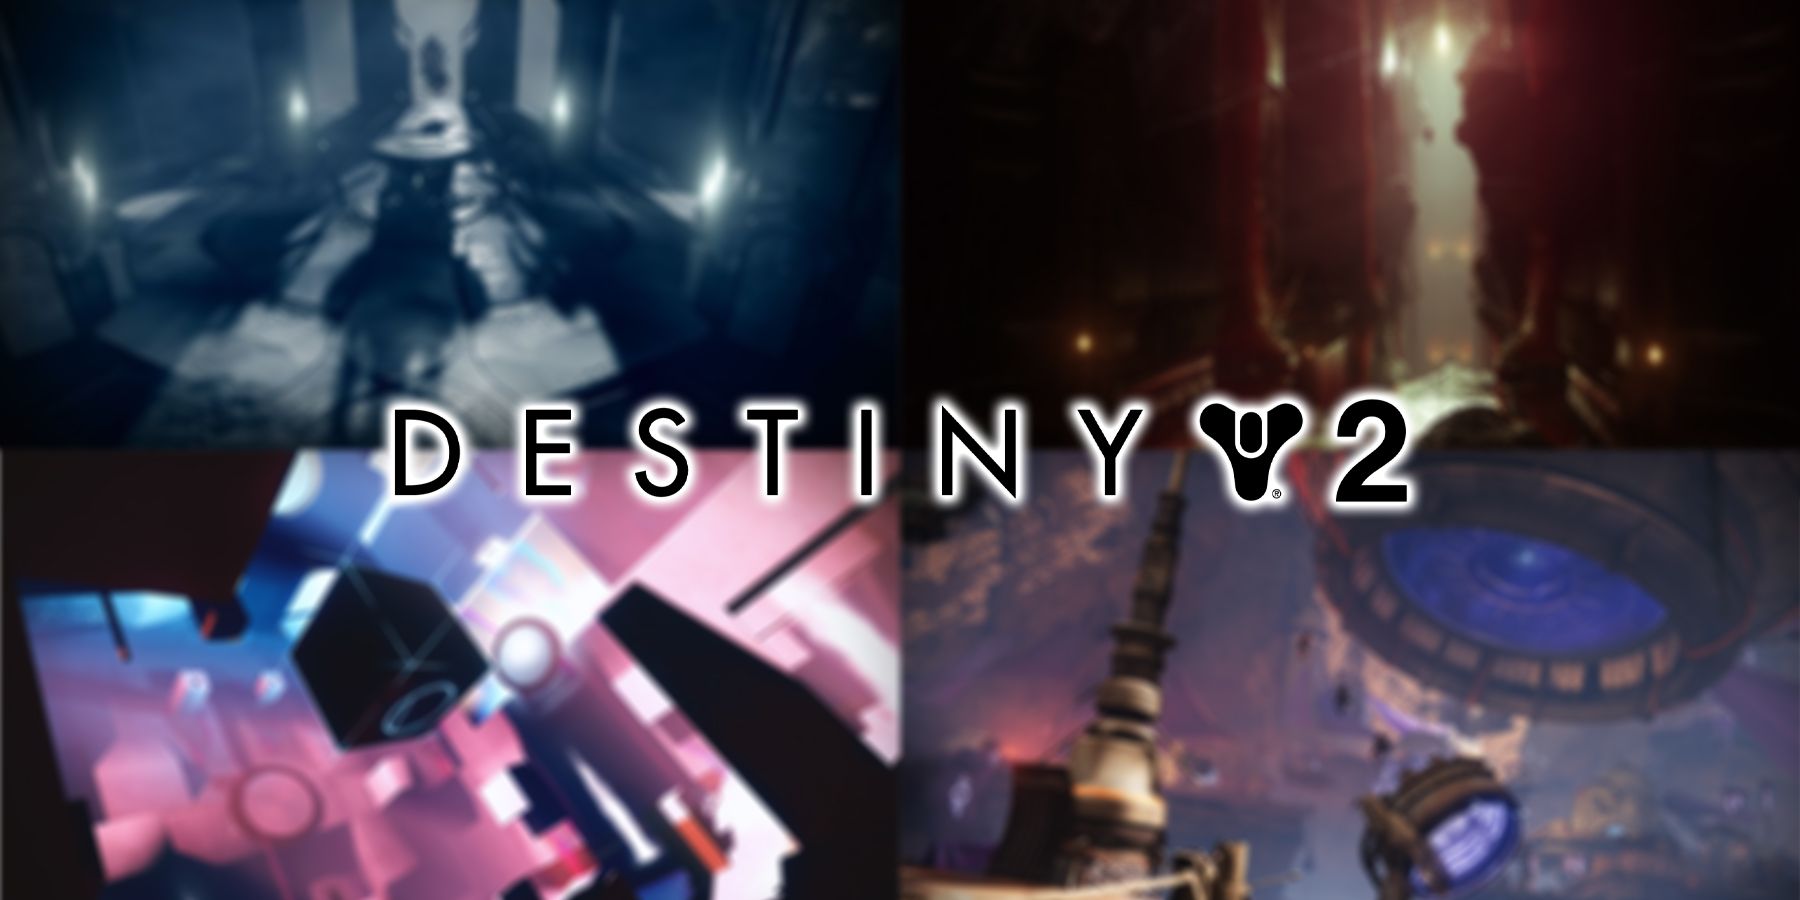 The Destiny 2 text logo with the game's four dungeons in the back ground. From left to right, top to bottom: The Shattered Throne, Pit of Heresy, Prophecy, and Grasp of Avarice dungeons.